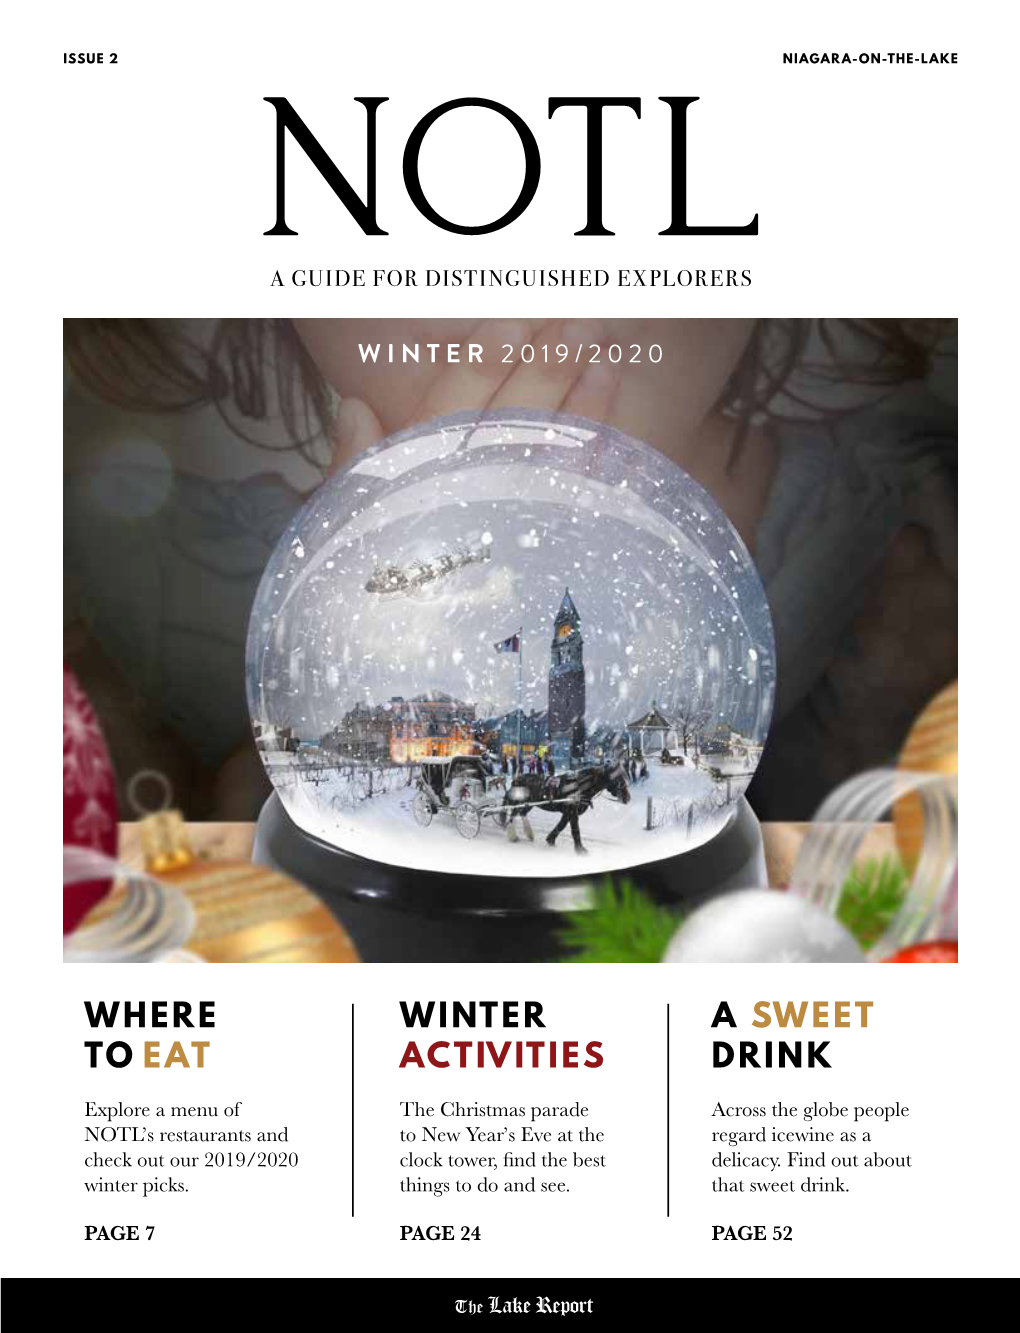 Where to Eat a Sweet Drink Winter Activities